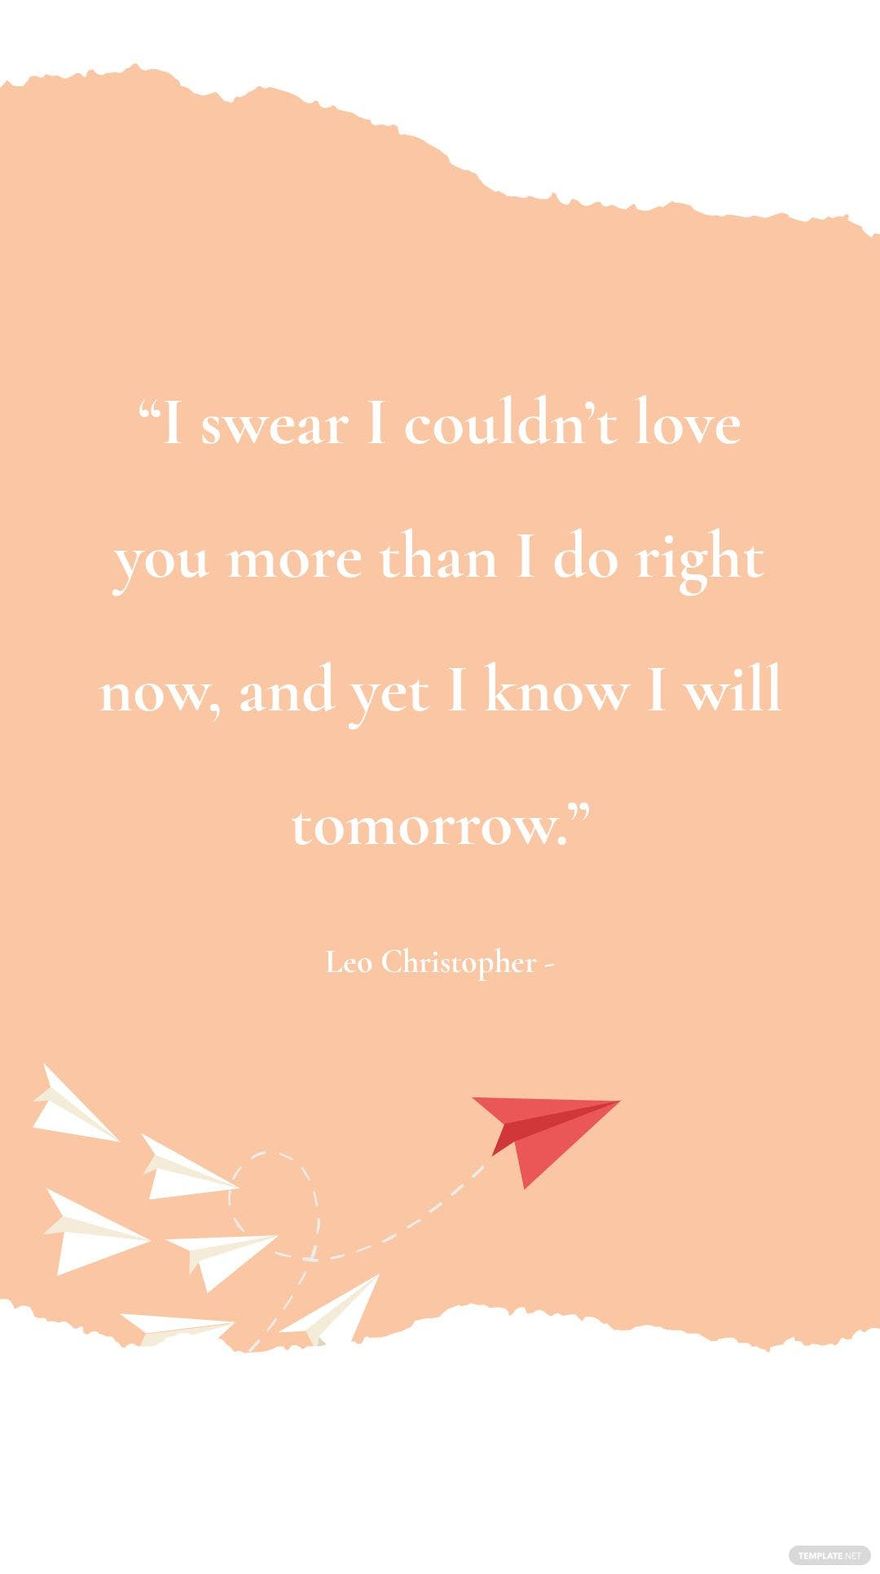 Leo Christopher - “I swear I couldn’t love you more than I do right now, and yet I know I will tomorrow.”